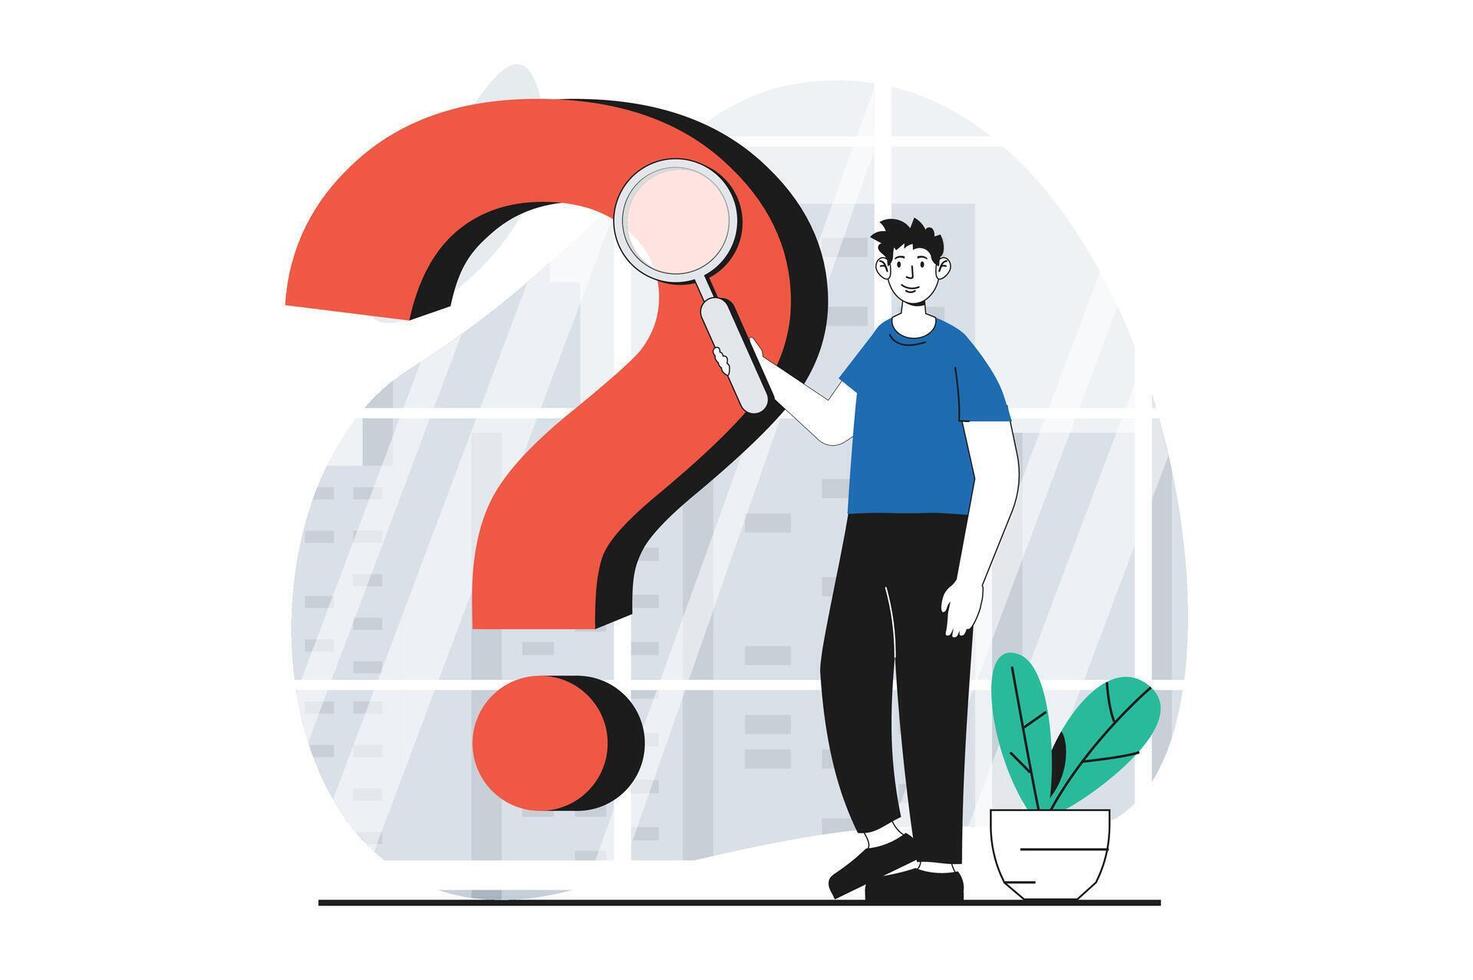 Finding solution concept with people scene in flat design for web. Man with magnifyier searching info and looking answer to question. Vector illustration for social media banner, marketing material.